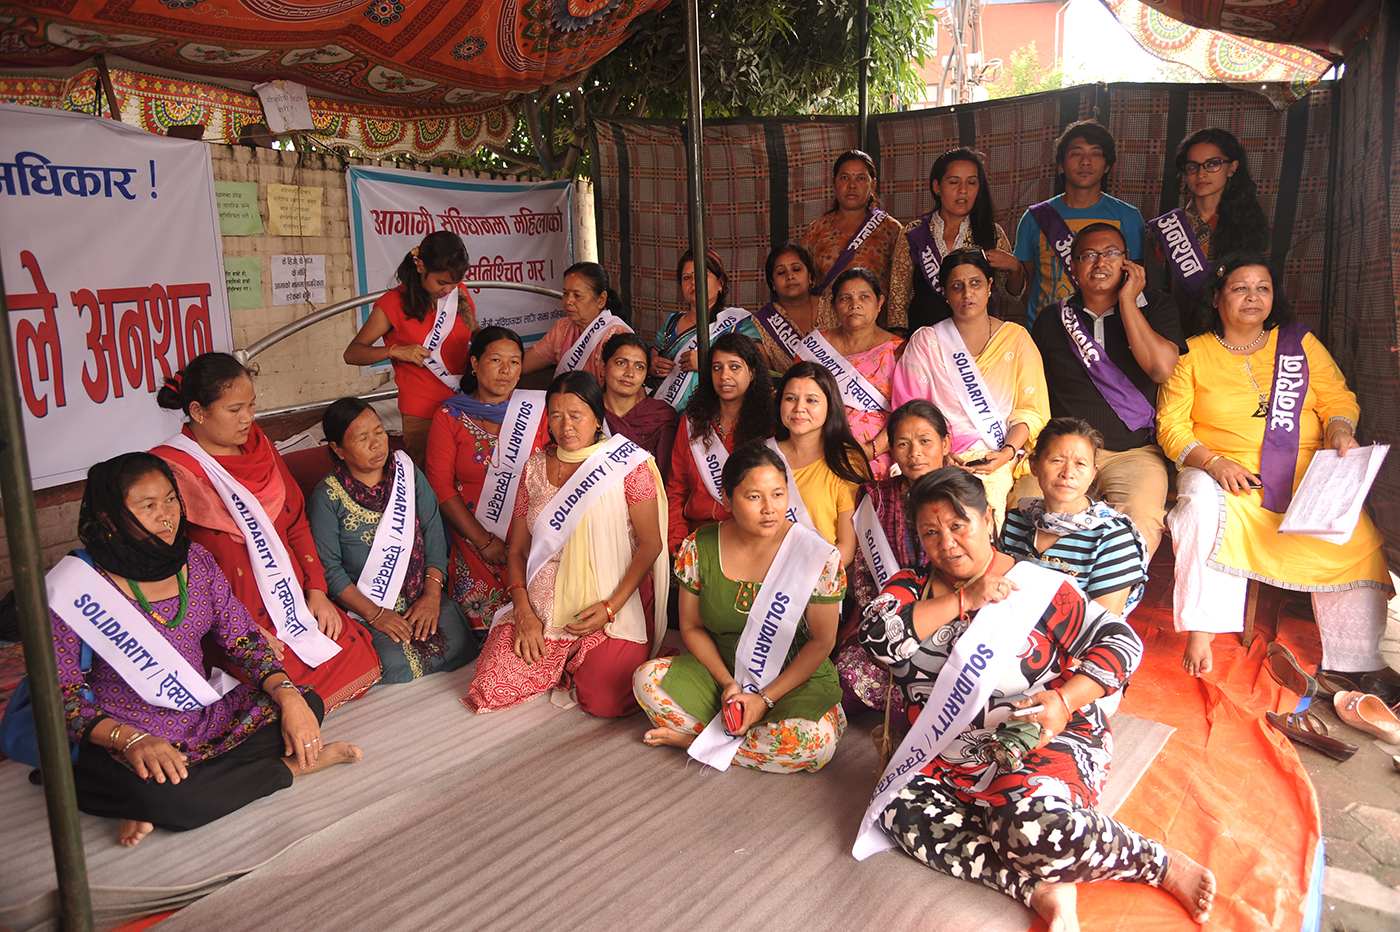 Hunger Strike demanding equal rights of women in the new constitution